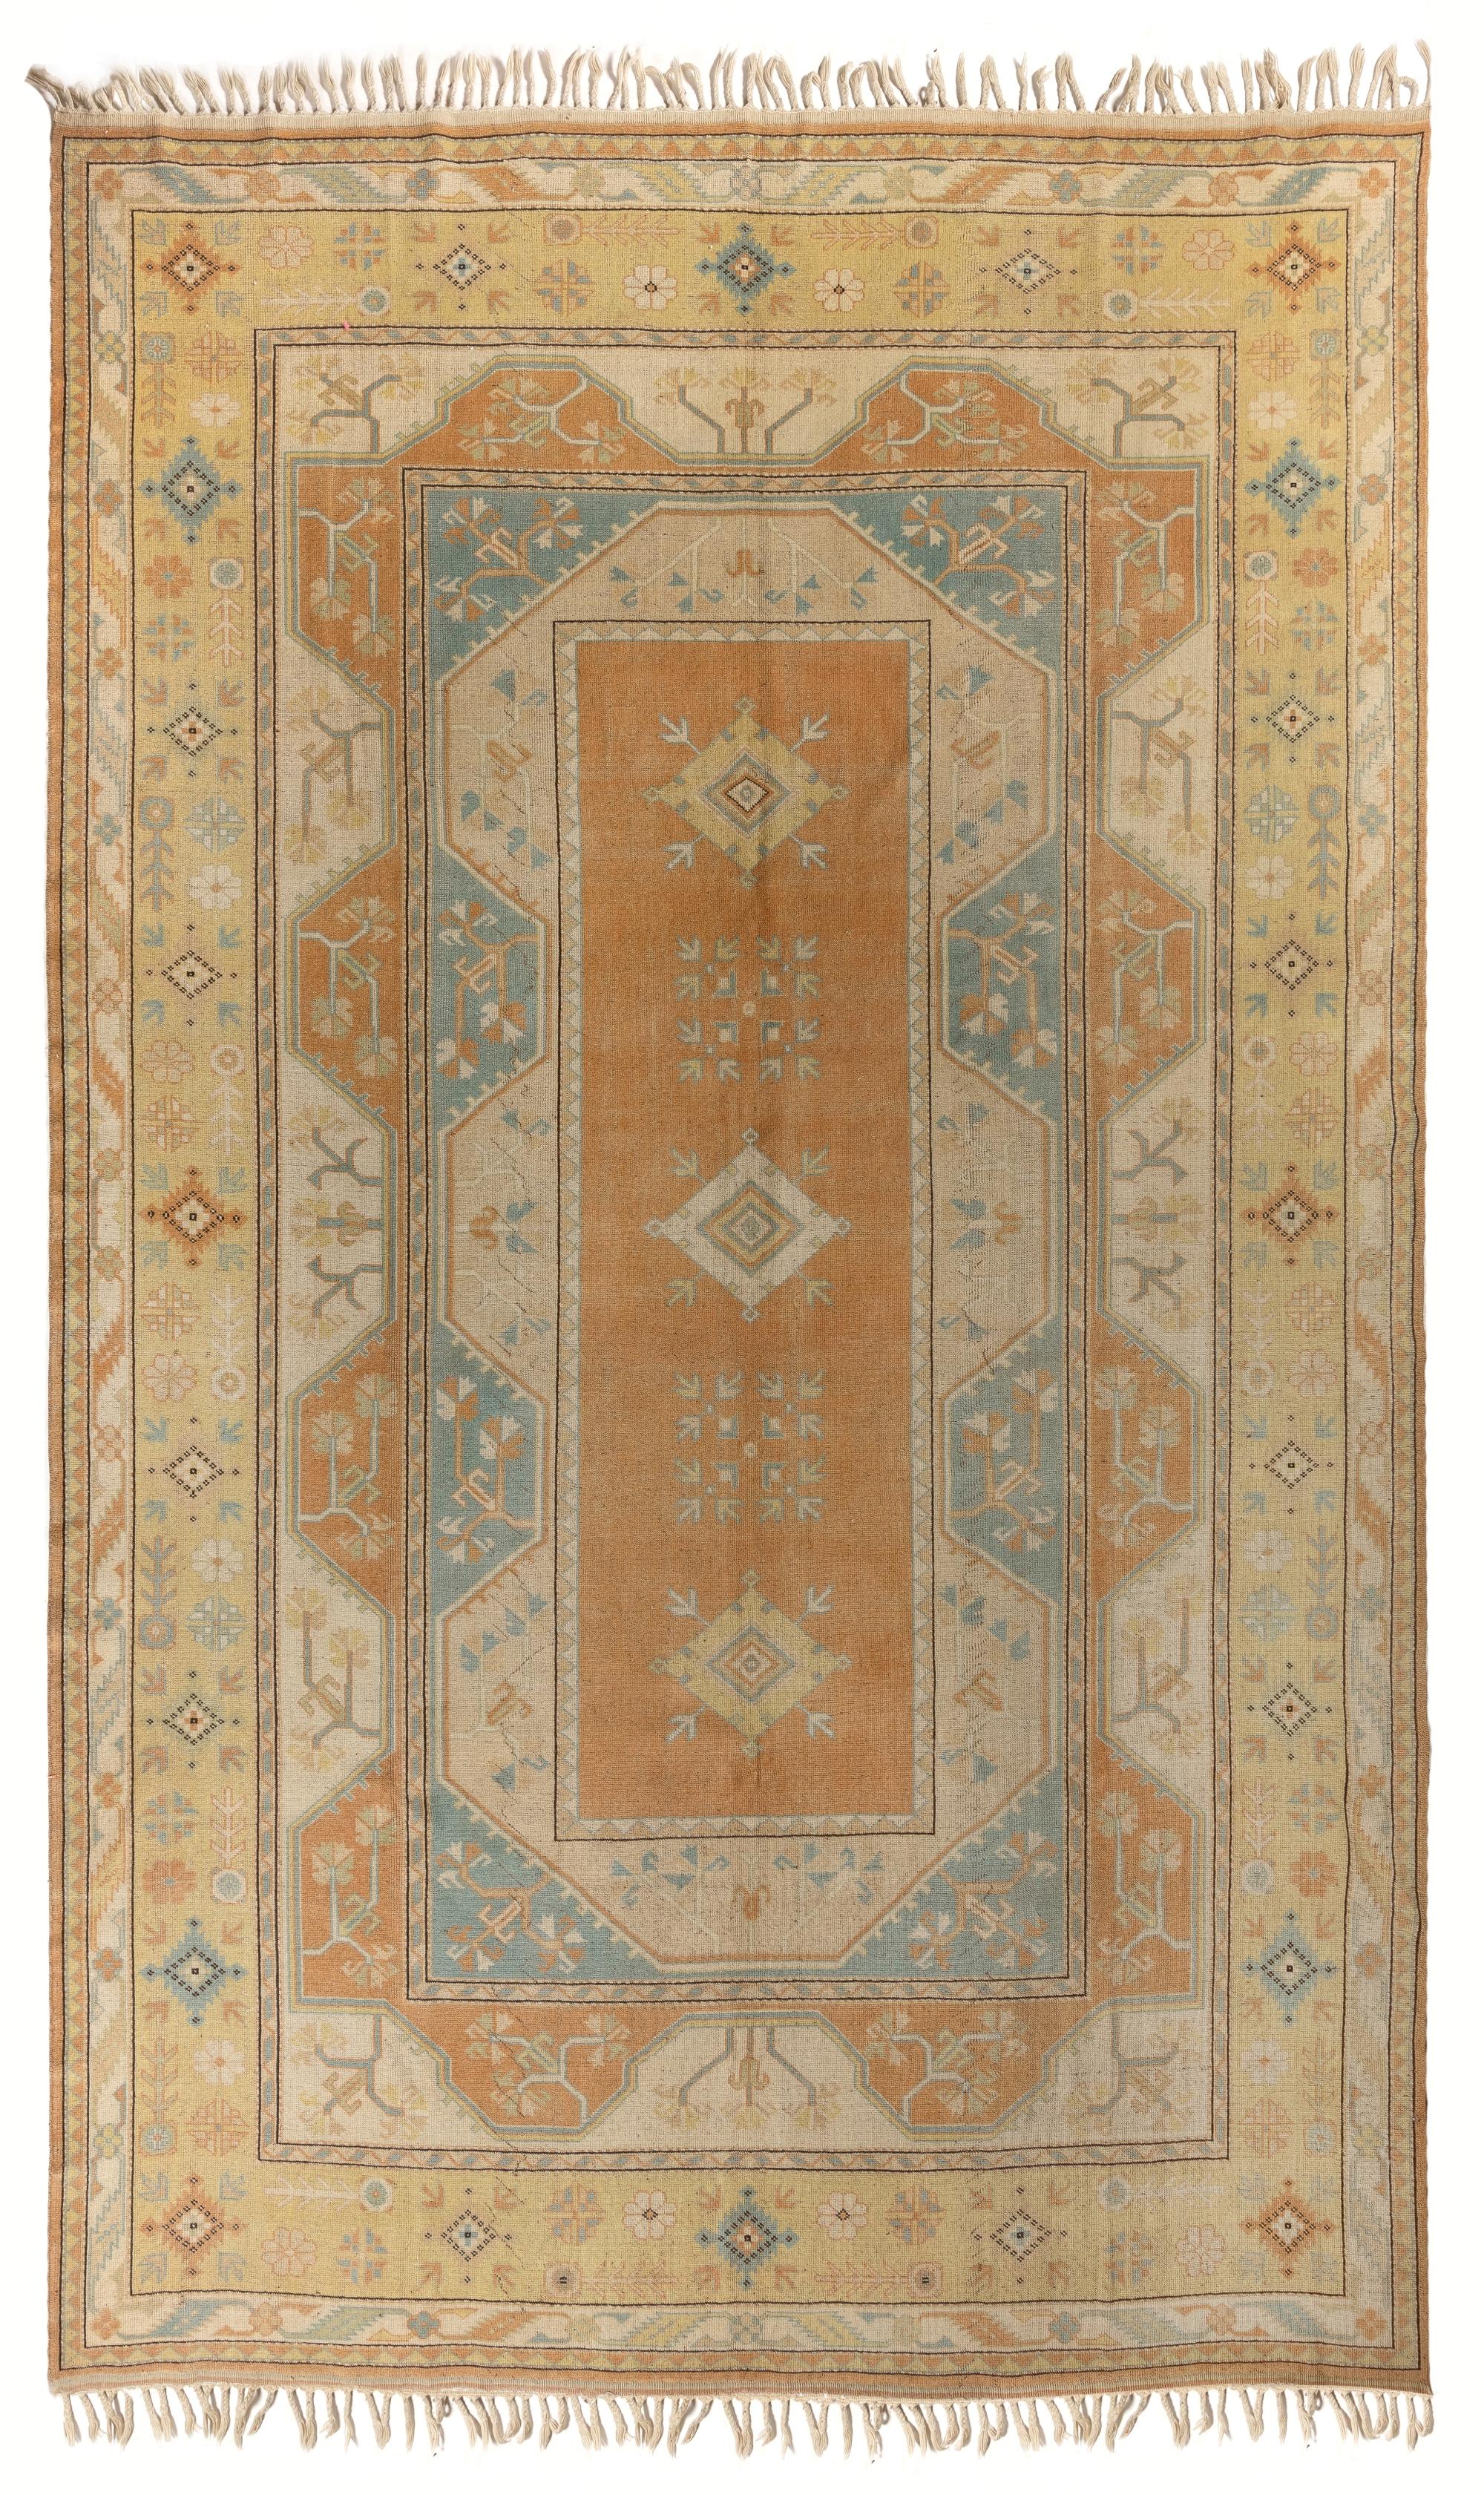 A finely hand knotted rug from the small town of Melas in South West Turkey that has been a famous rug making center, since 18th century.
This beautiful example is well drawn and in excellent condition. Soft medium wool pile on wool